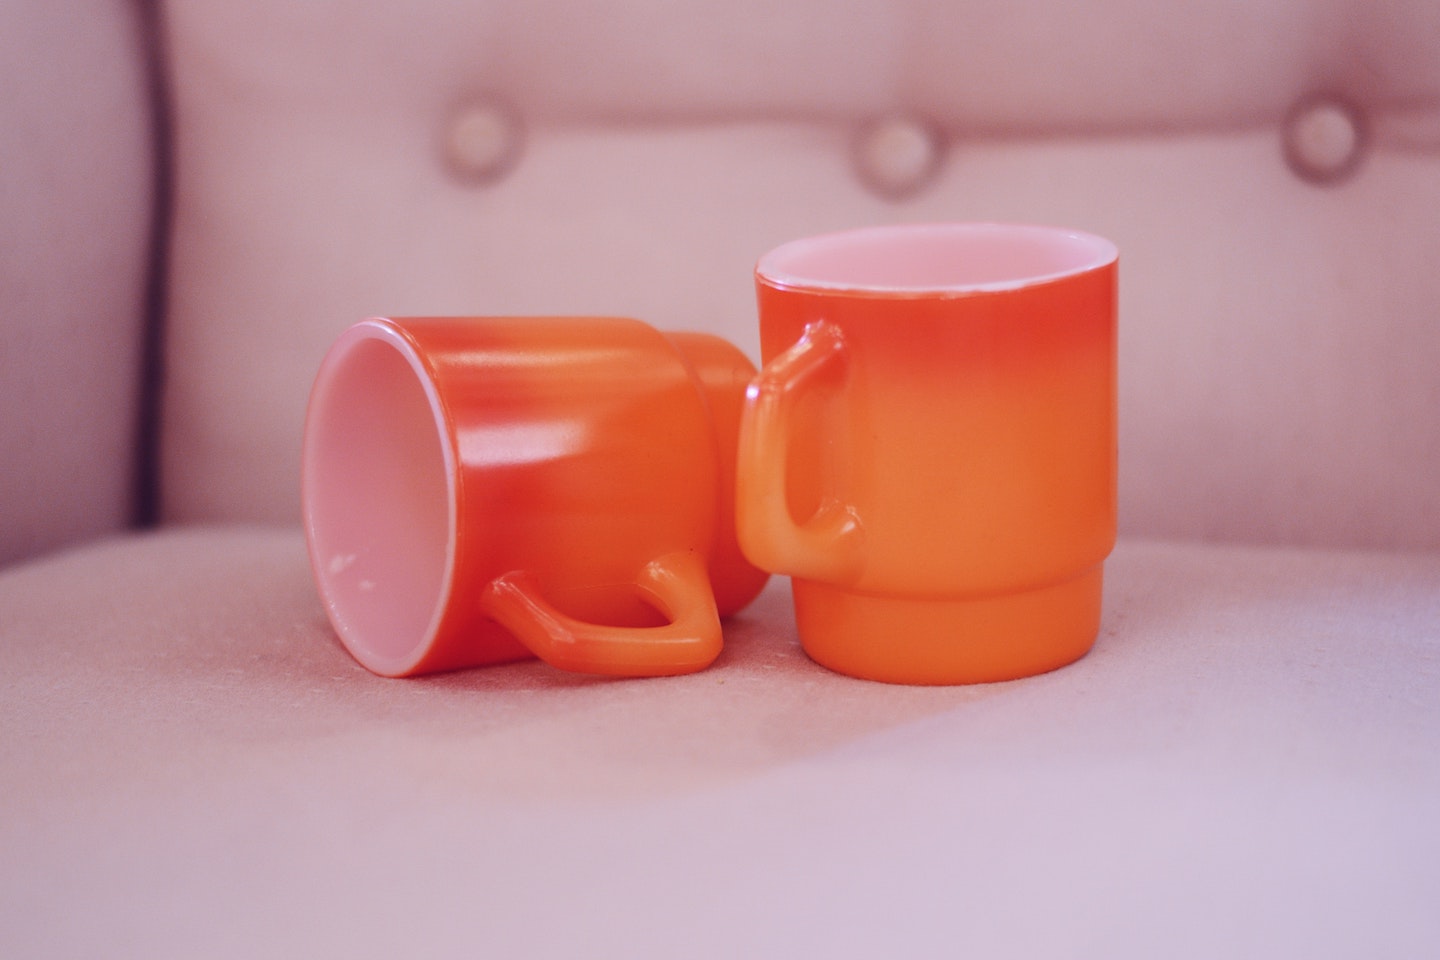 Two orange mugs are on a chair. One is laying on its side.